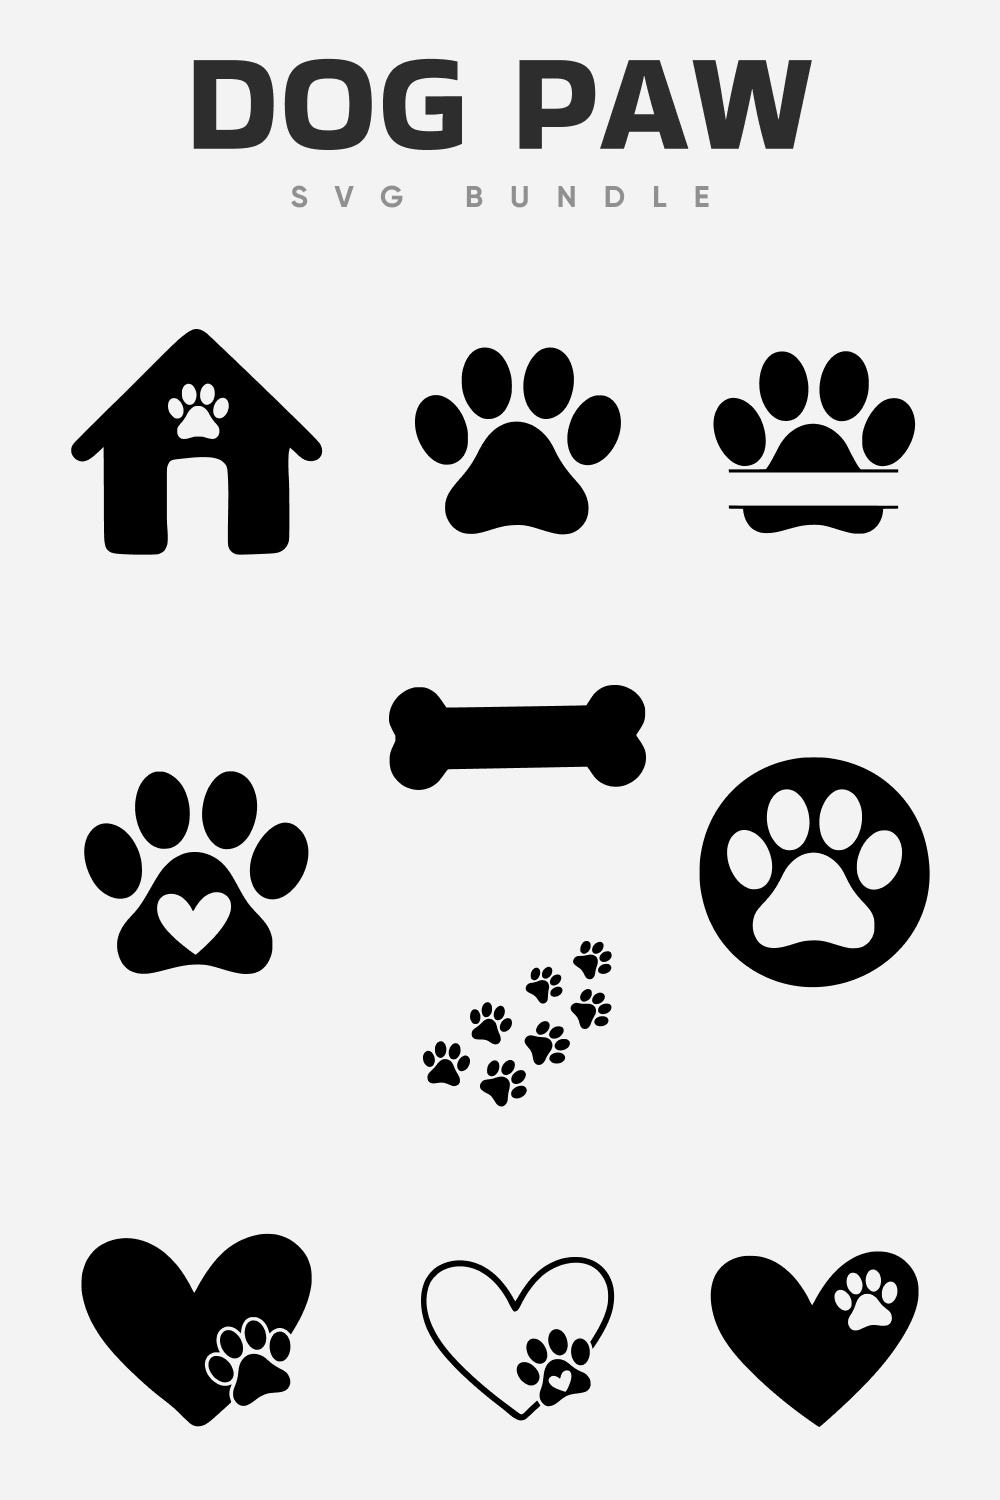 Drawings of dog paws and hearts in white and black.